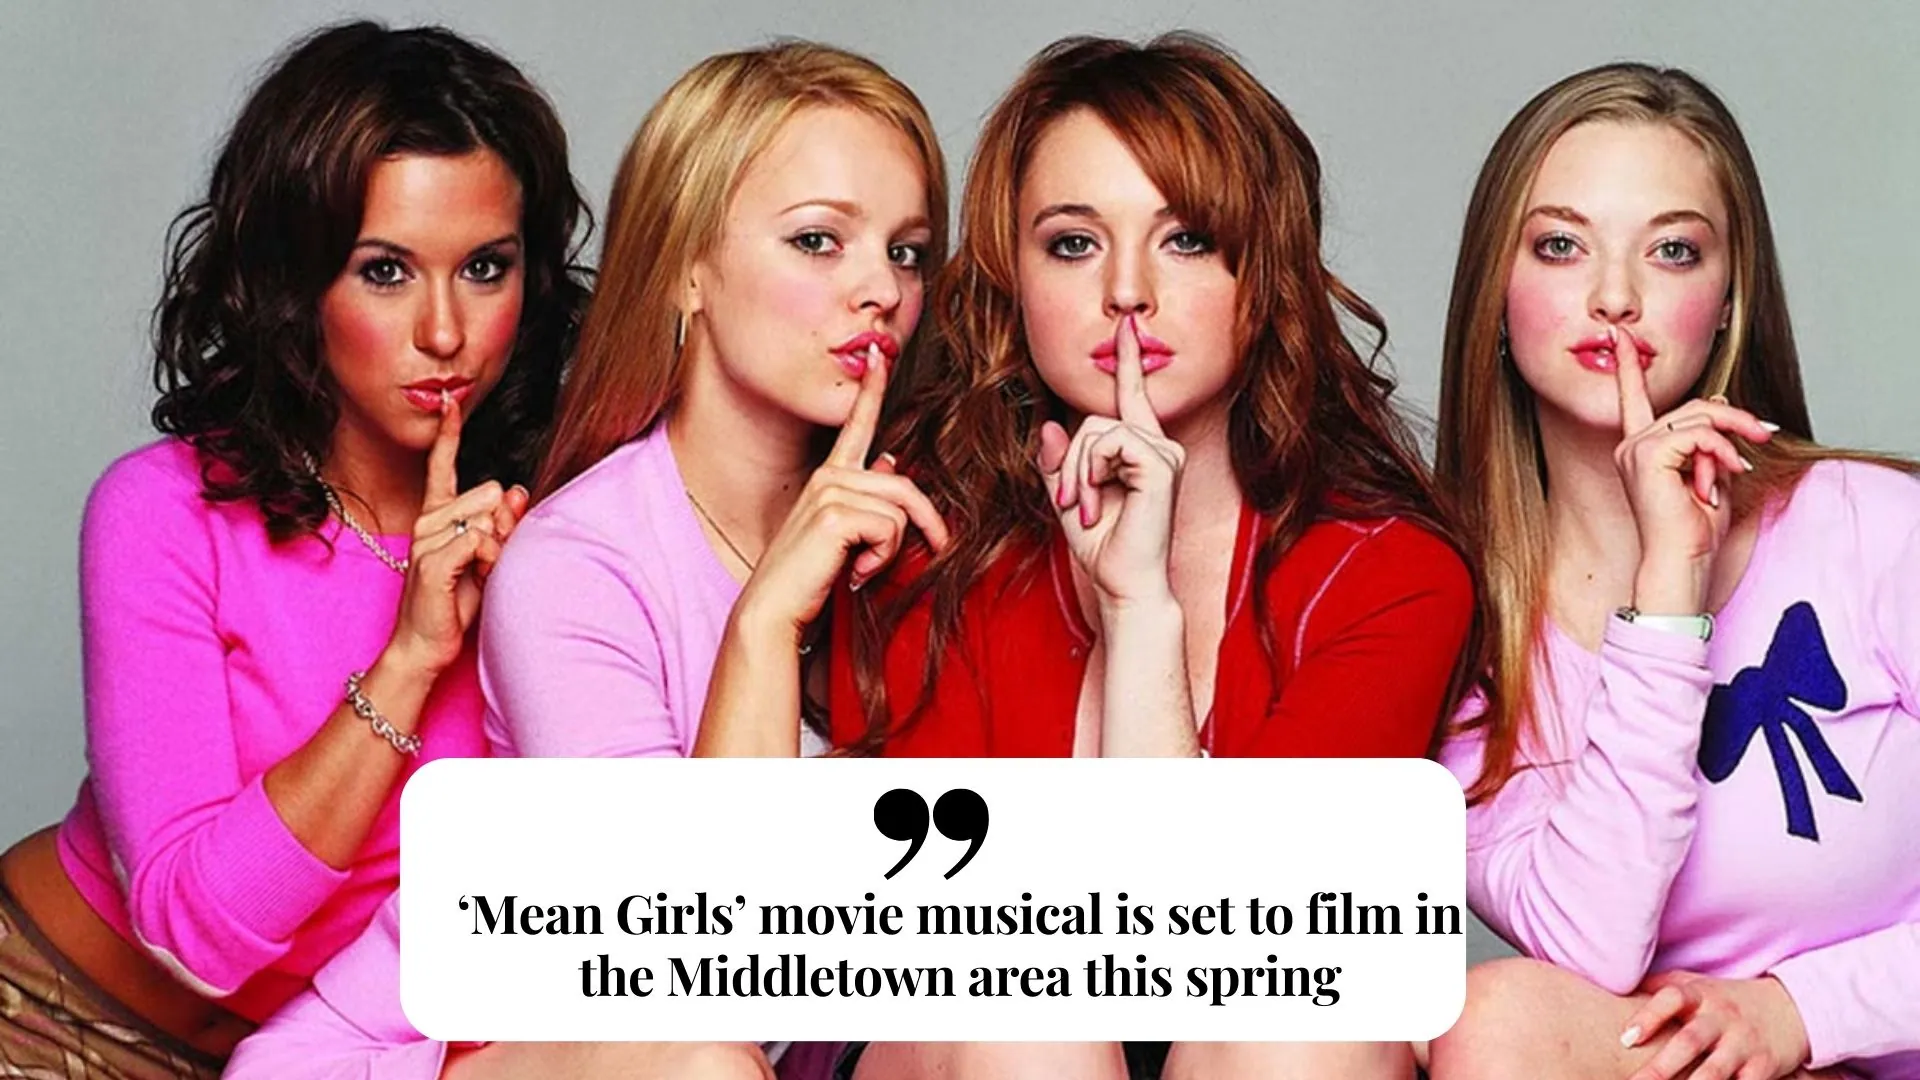 ‘Mean Girls’ movie musical is set to film in the Middletown area this spring (image credit independent)